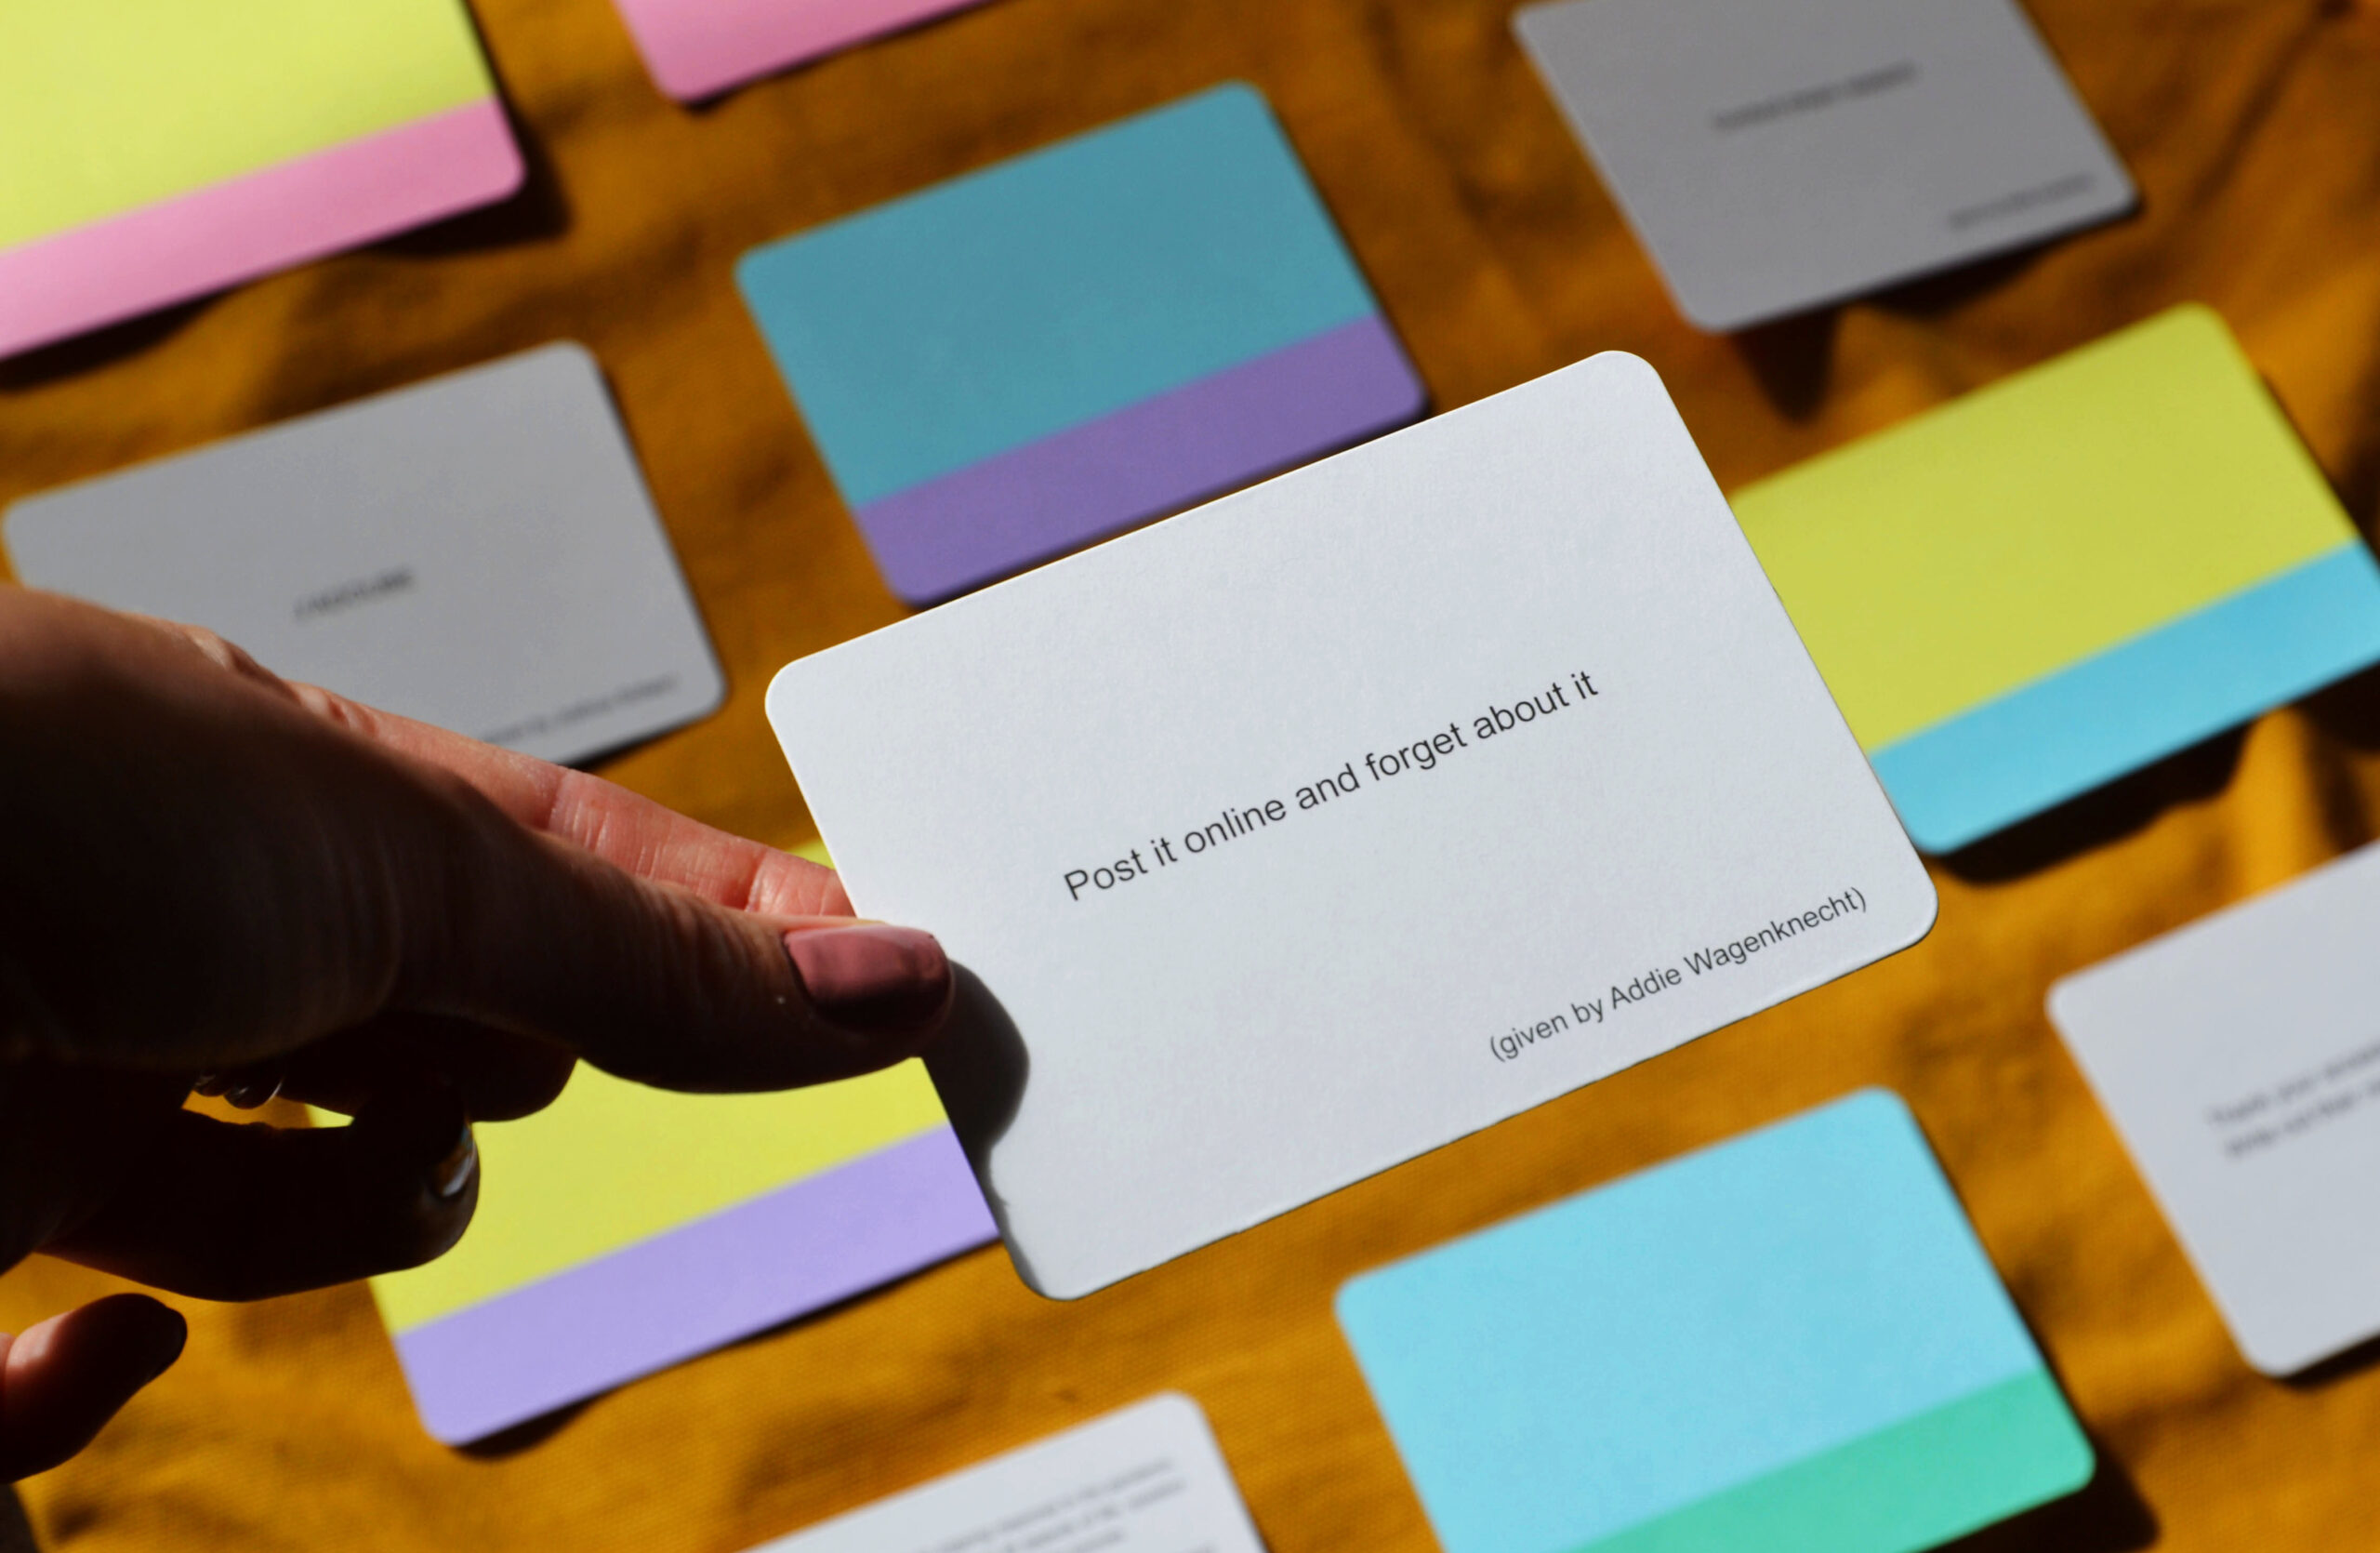 Inspired by Oblique Strategies, Abandon Normal Strategies is a series of card prompts to overcome creative blocks; an alternative approach to thinking and unexpected courses of action.